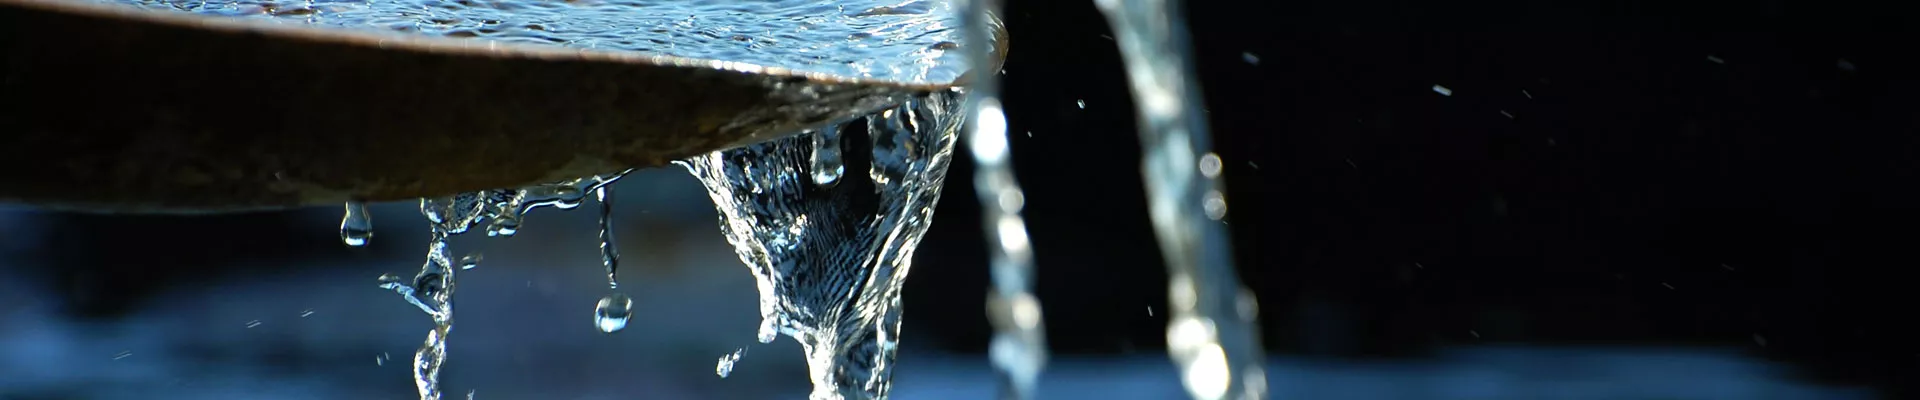 Hard water and soft water